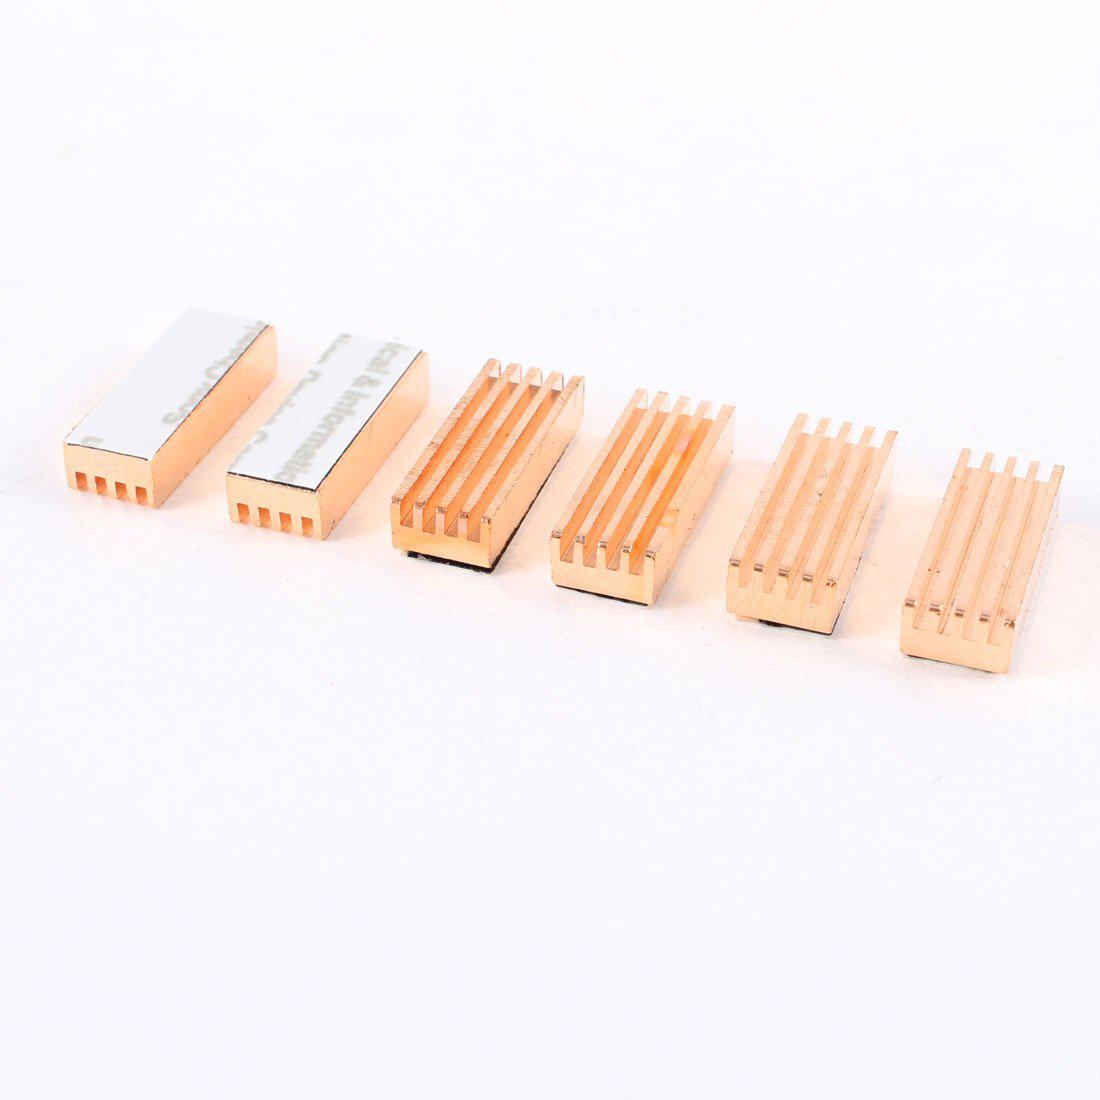 uxcell 6pcs mc-200 pure copper heatsink, 22x8x5mm self-adhesive cooling fins nvme ssd memory cooler heat sink for laptop pc d